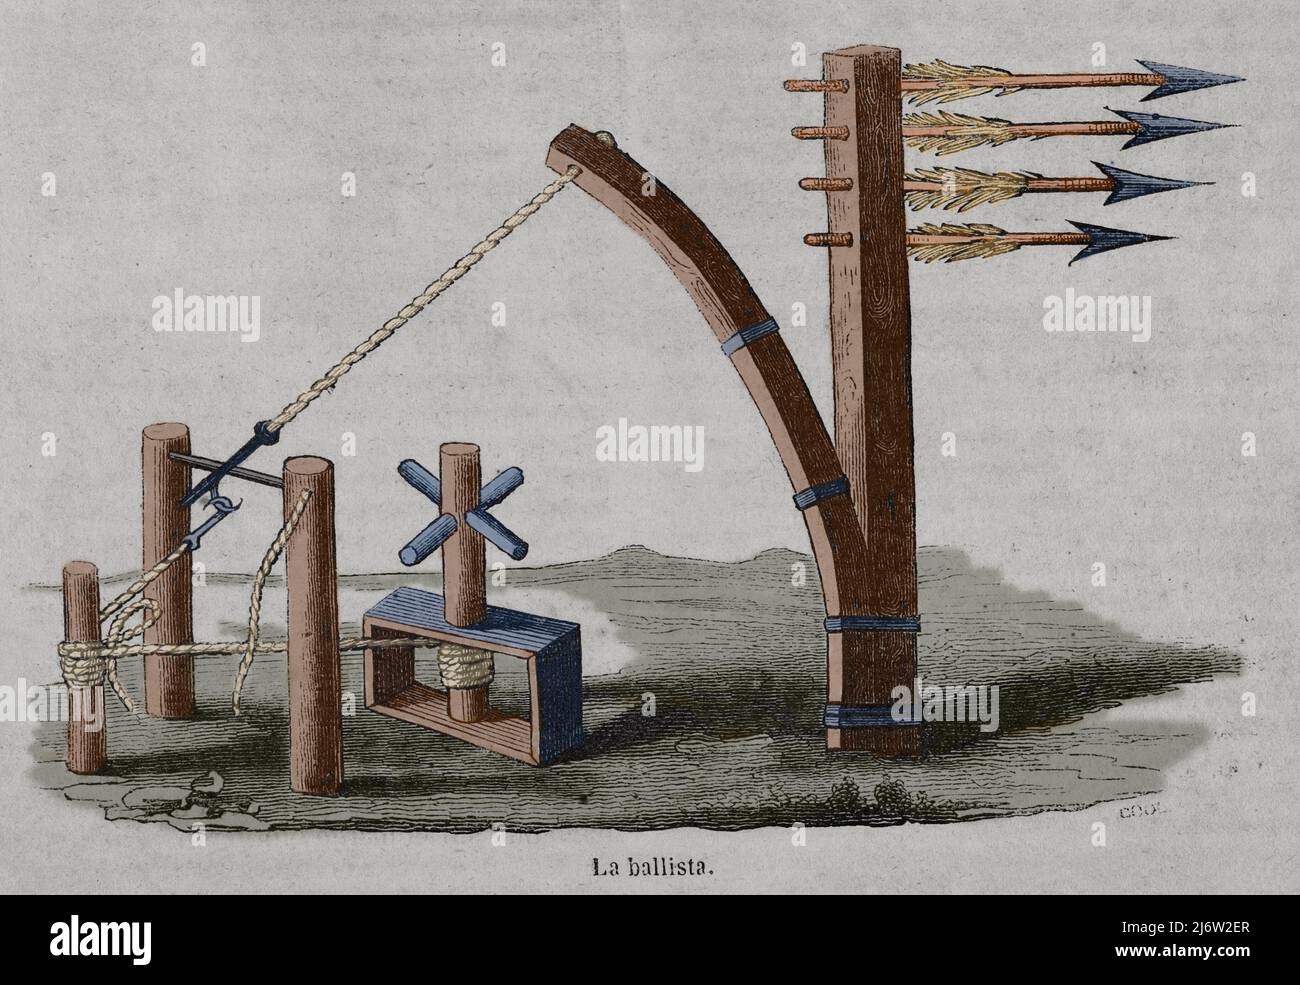 Ancient times. The ballista or bolt thrower. Ancient siege weapon that threw arrows, darts and javelins to distant targets. Engraving. Later colouration. Historia General de España by Father Mariana. Madrid, 1852. Stock Photo